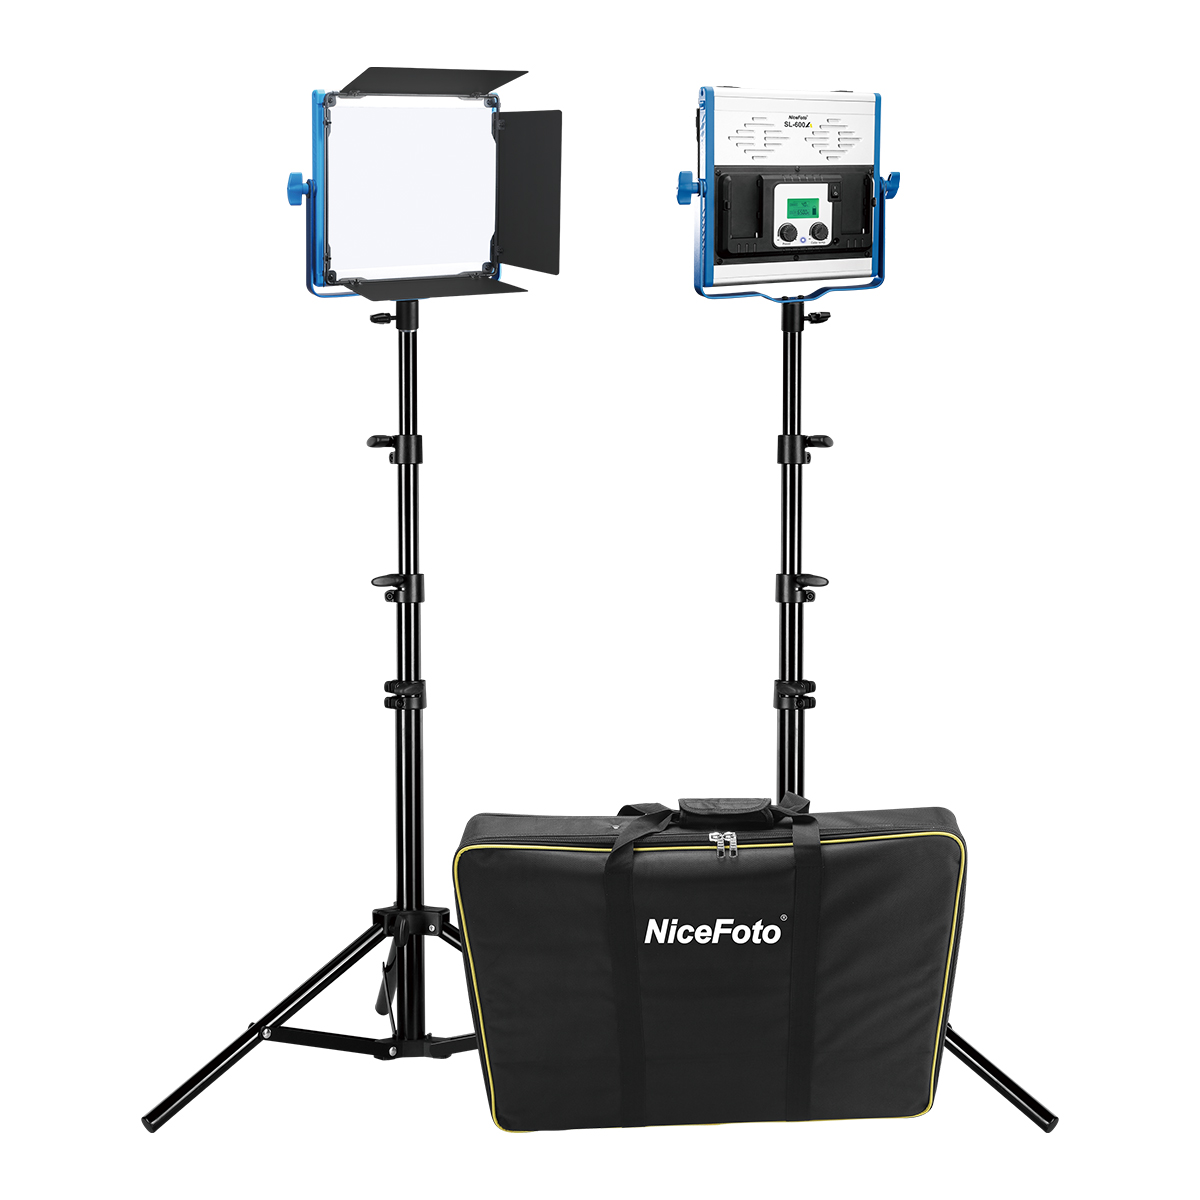 ColorGlow Pro 600 - Professional LED video light with app control